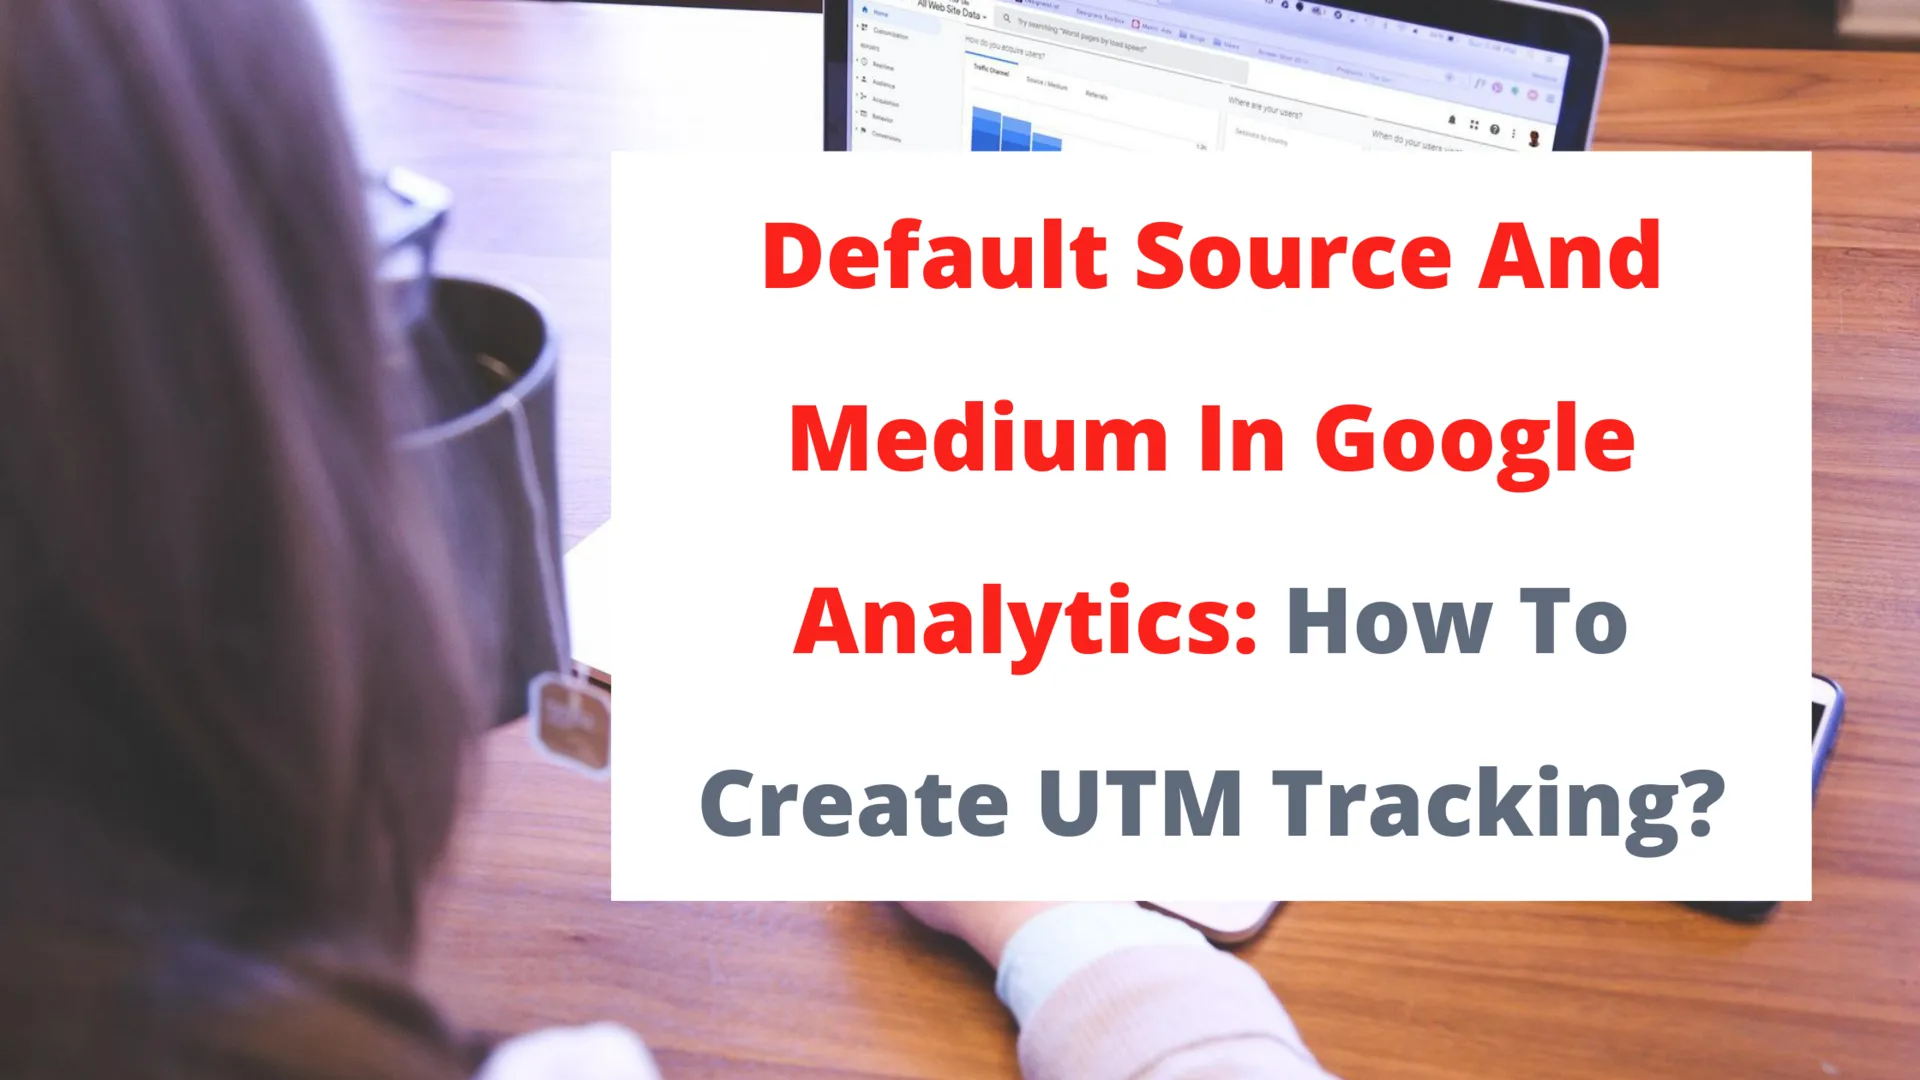 what is not considered a “source” in google analytics by default?